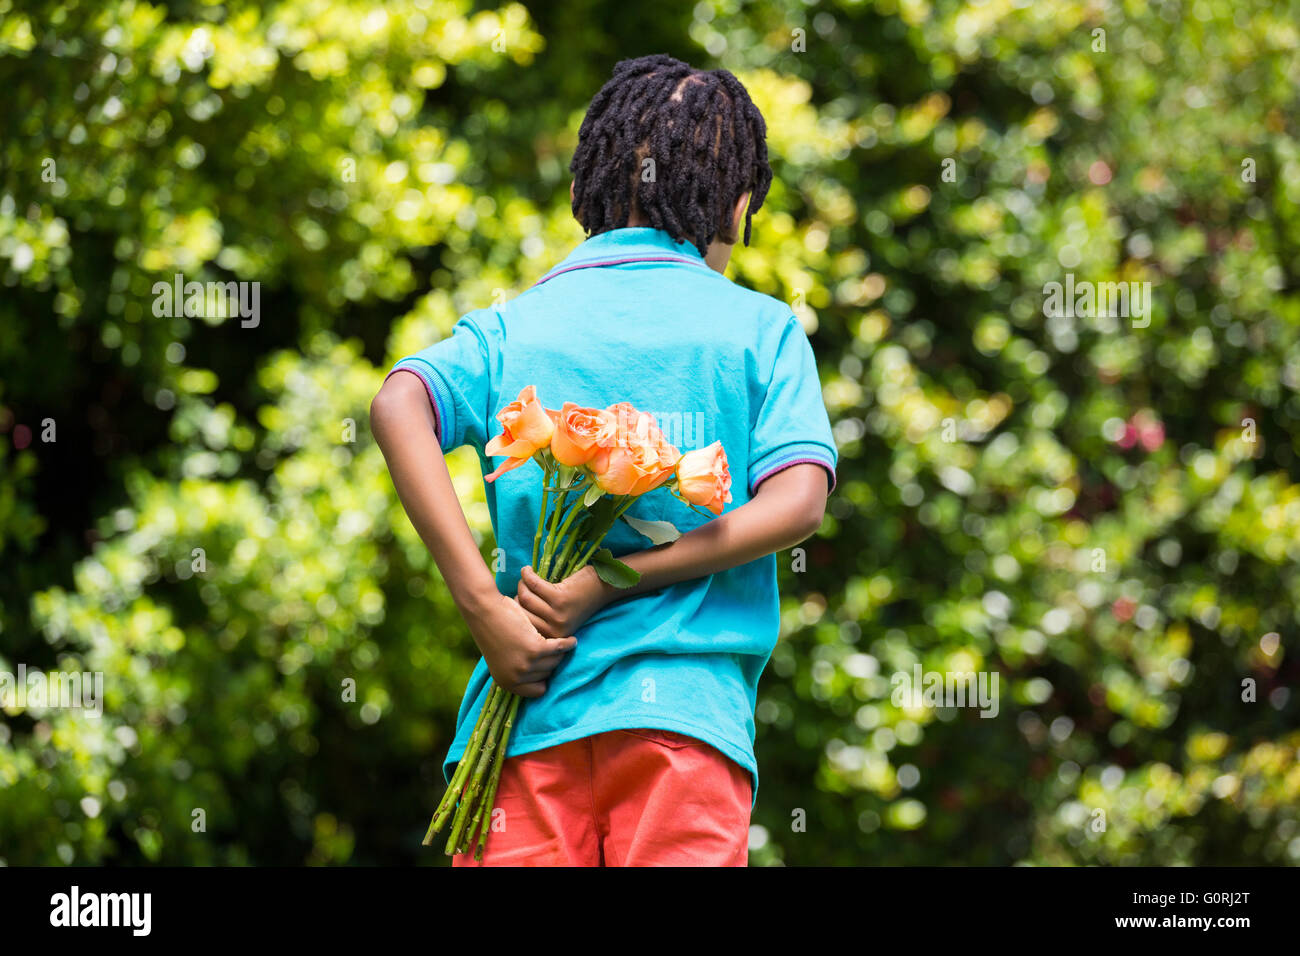 A kid hiding bouquet behind back Stock Photo